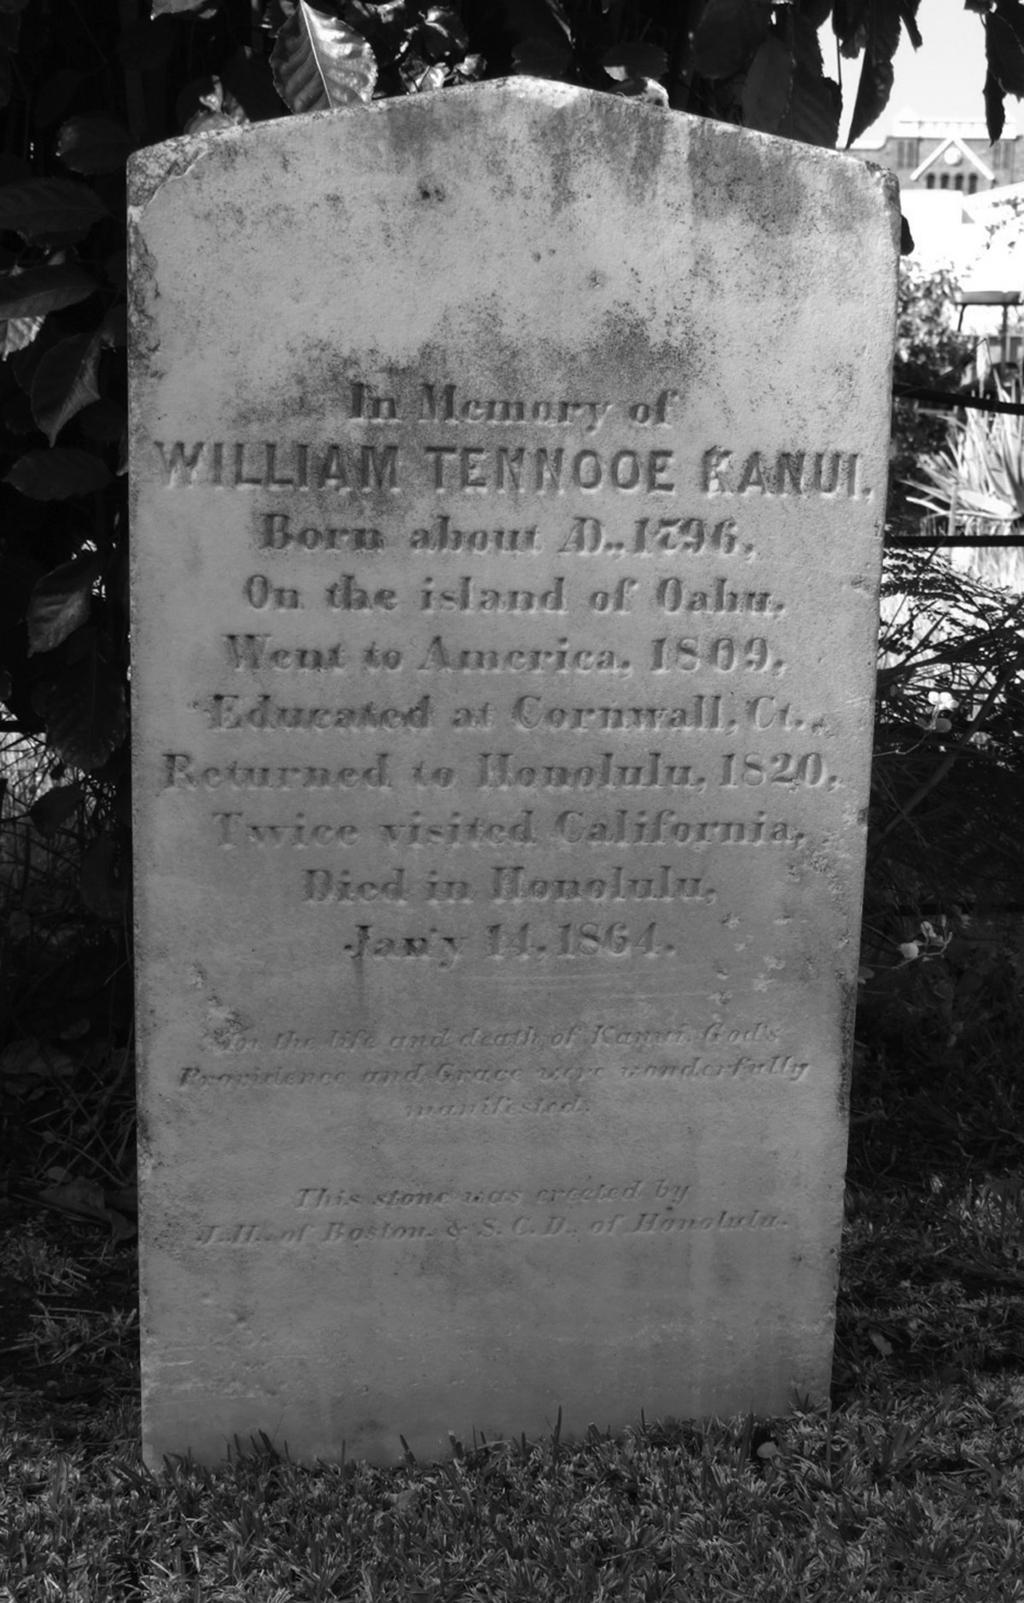 Headstone of William Tennooe Kanui located in cemetery